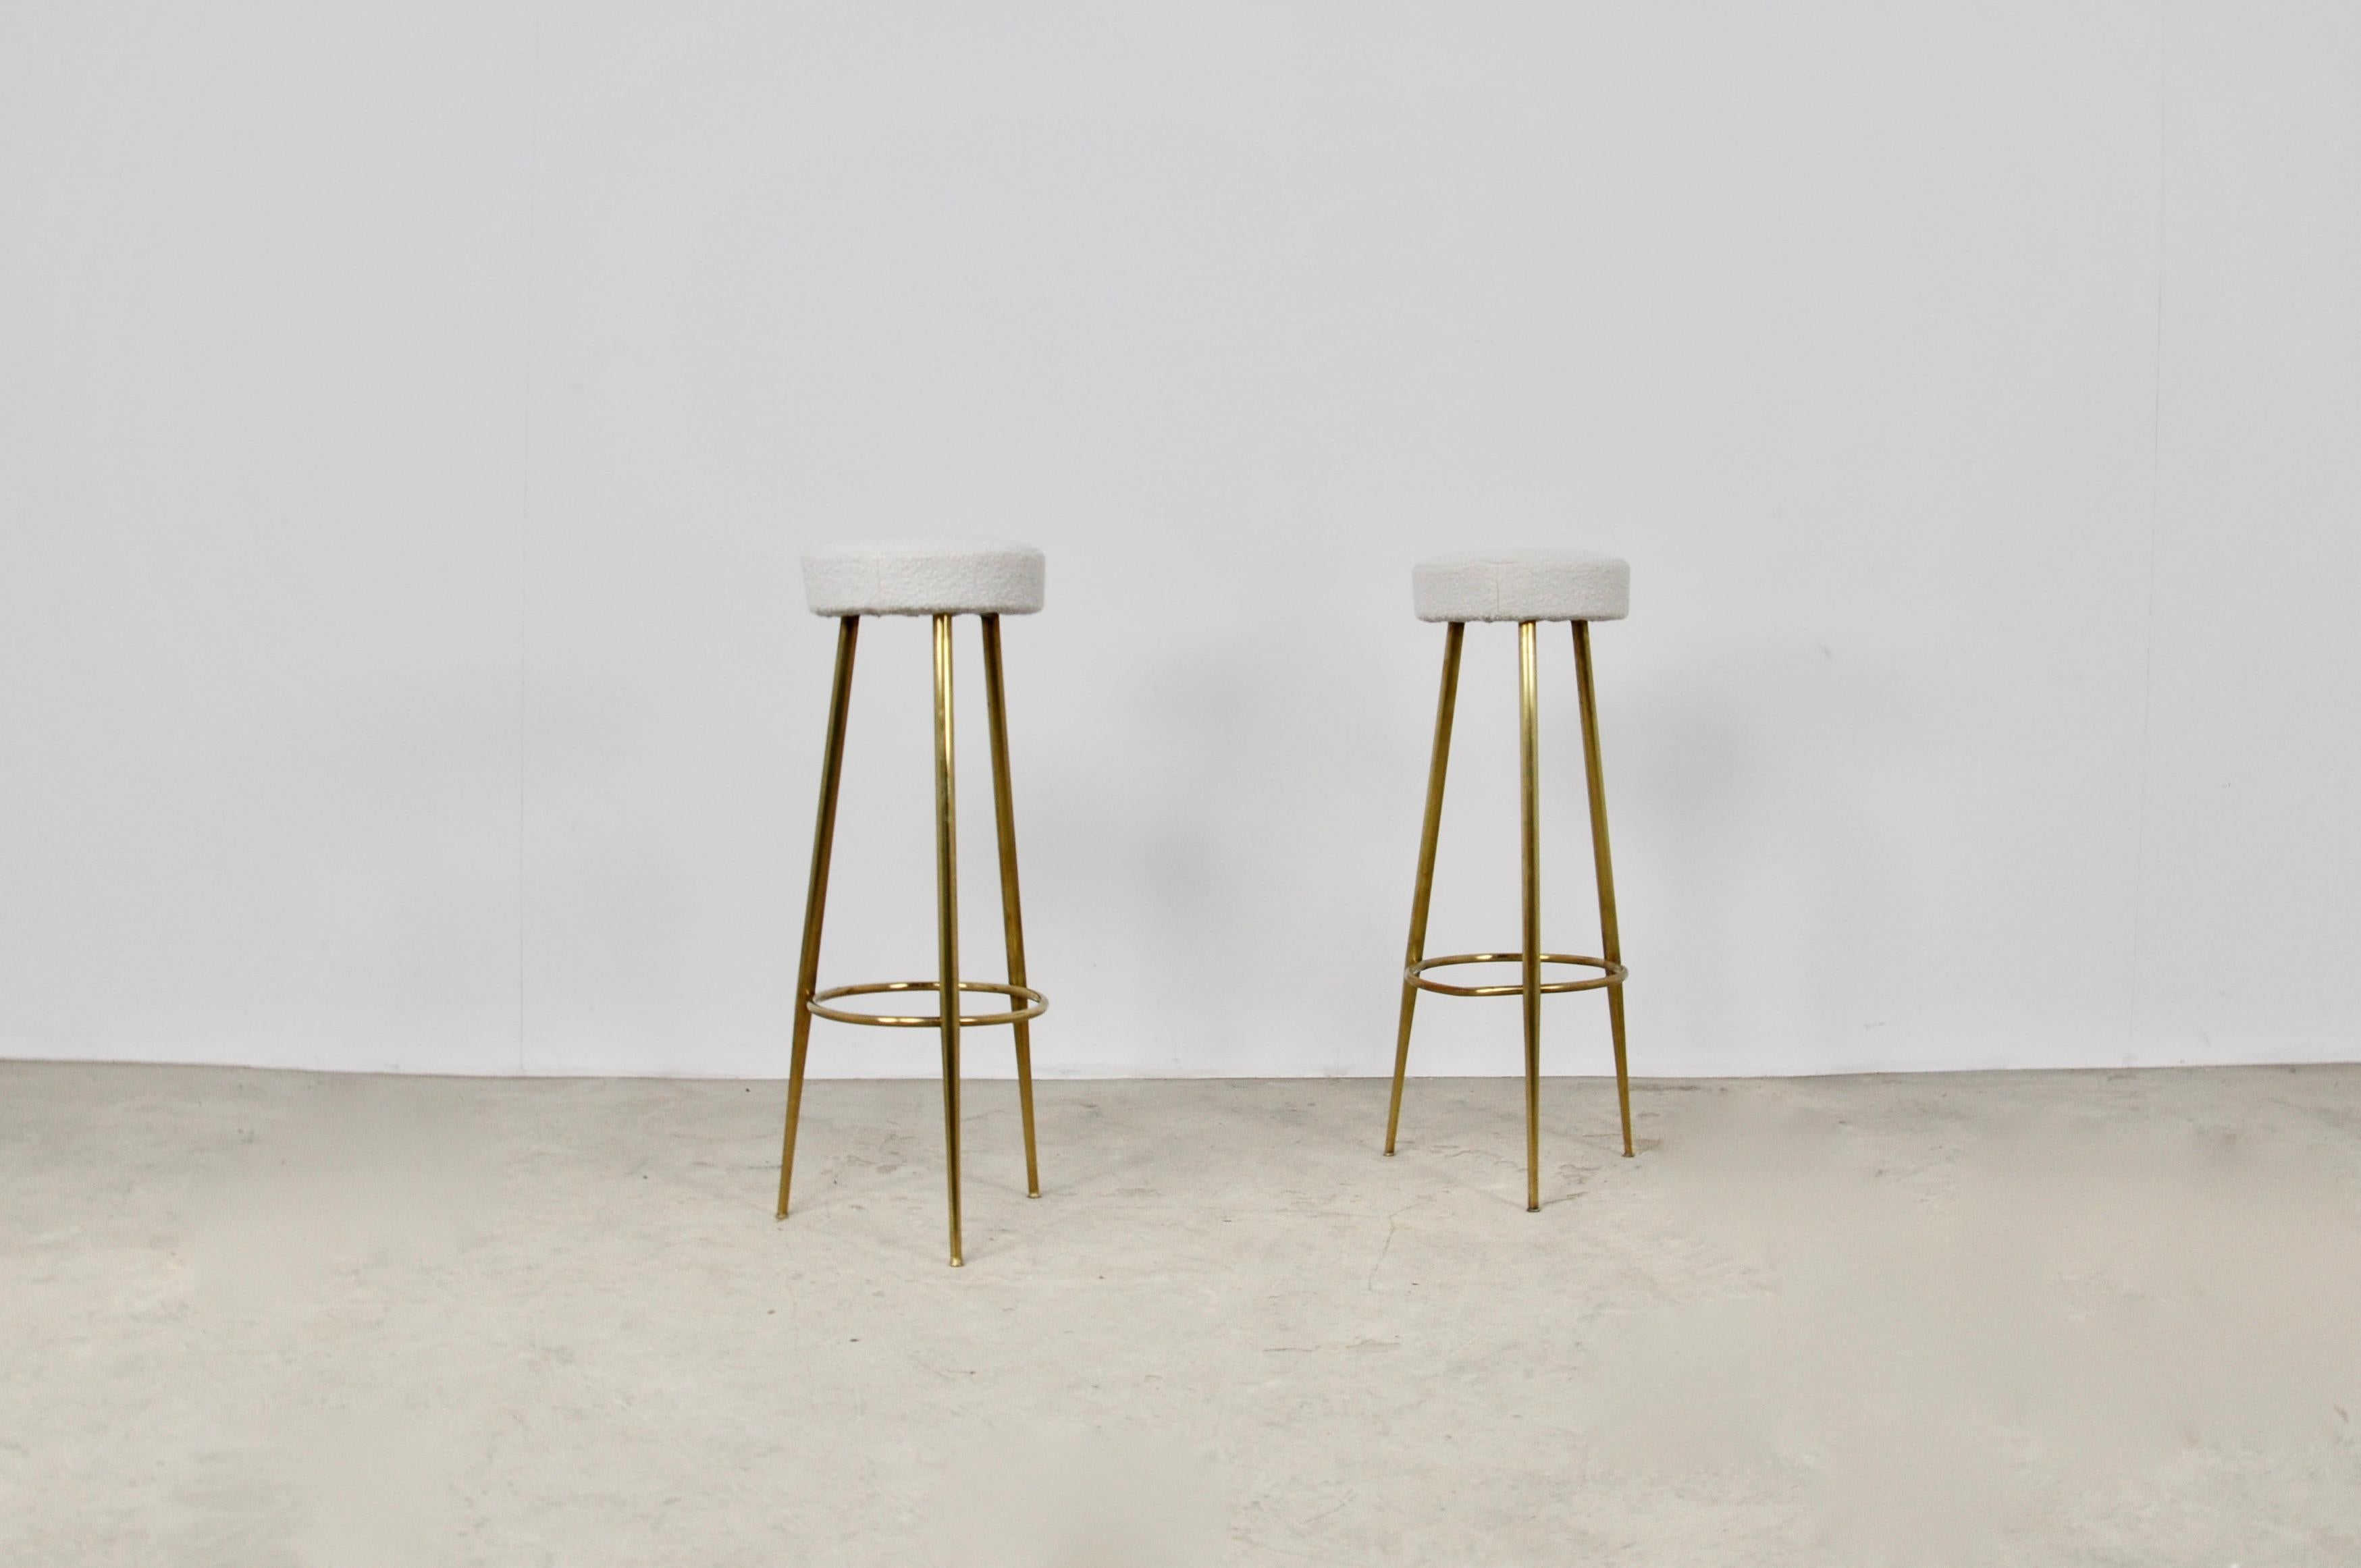 Pair of stool in brass and white fabric. Wear due to time and age of stools.